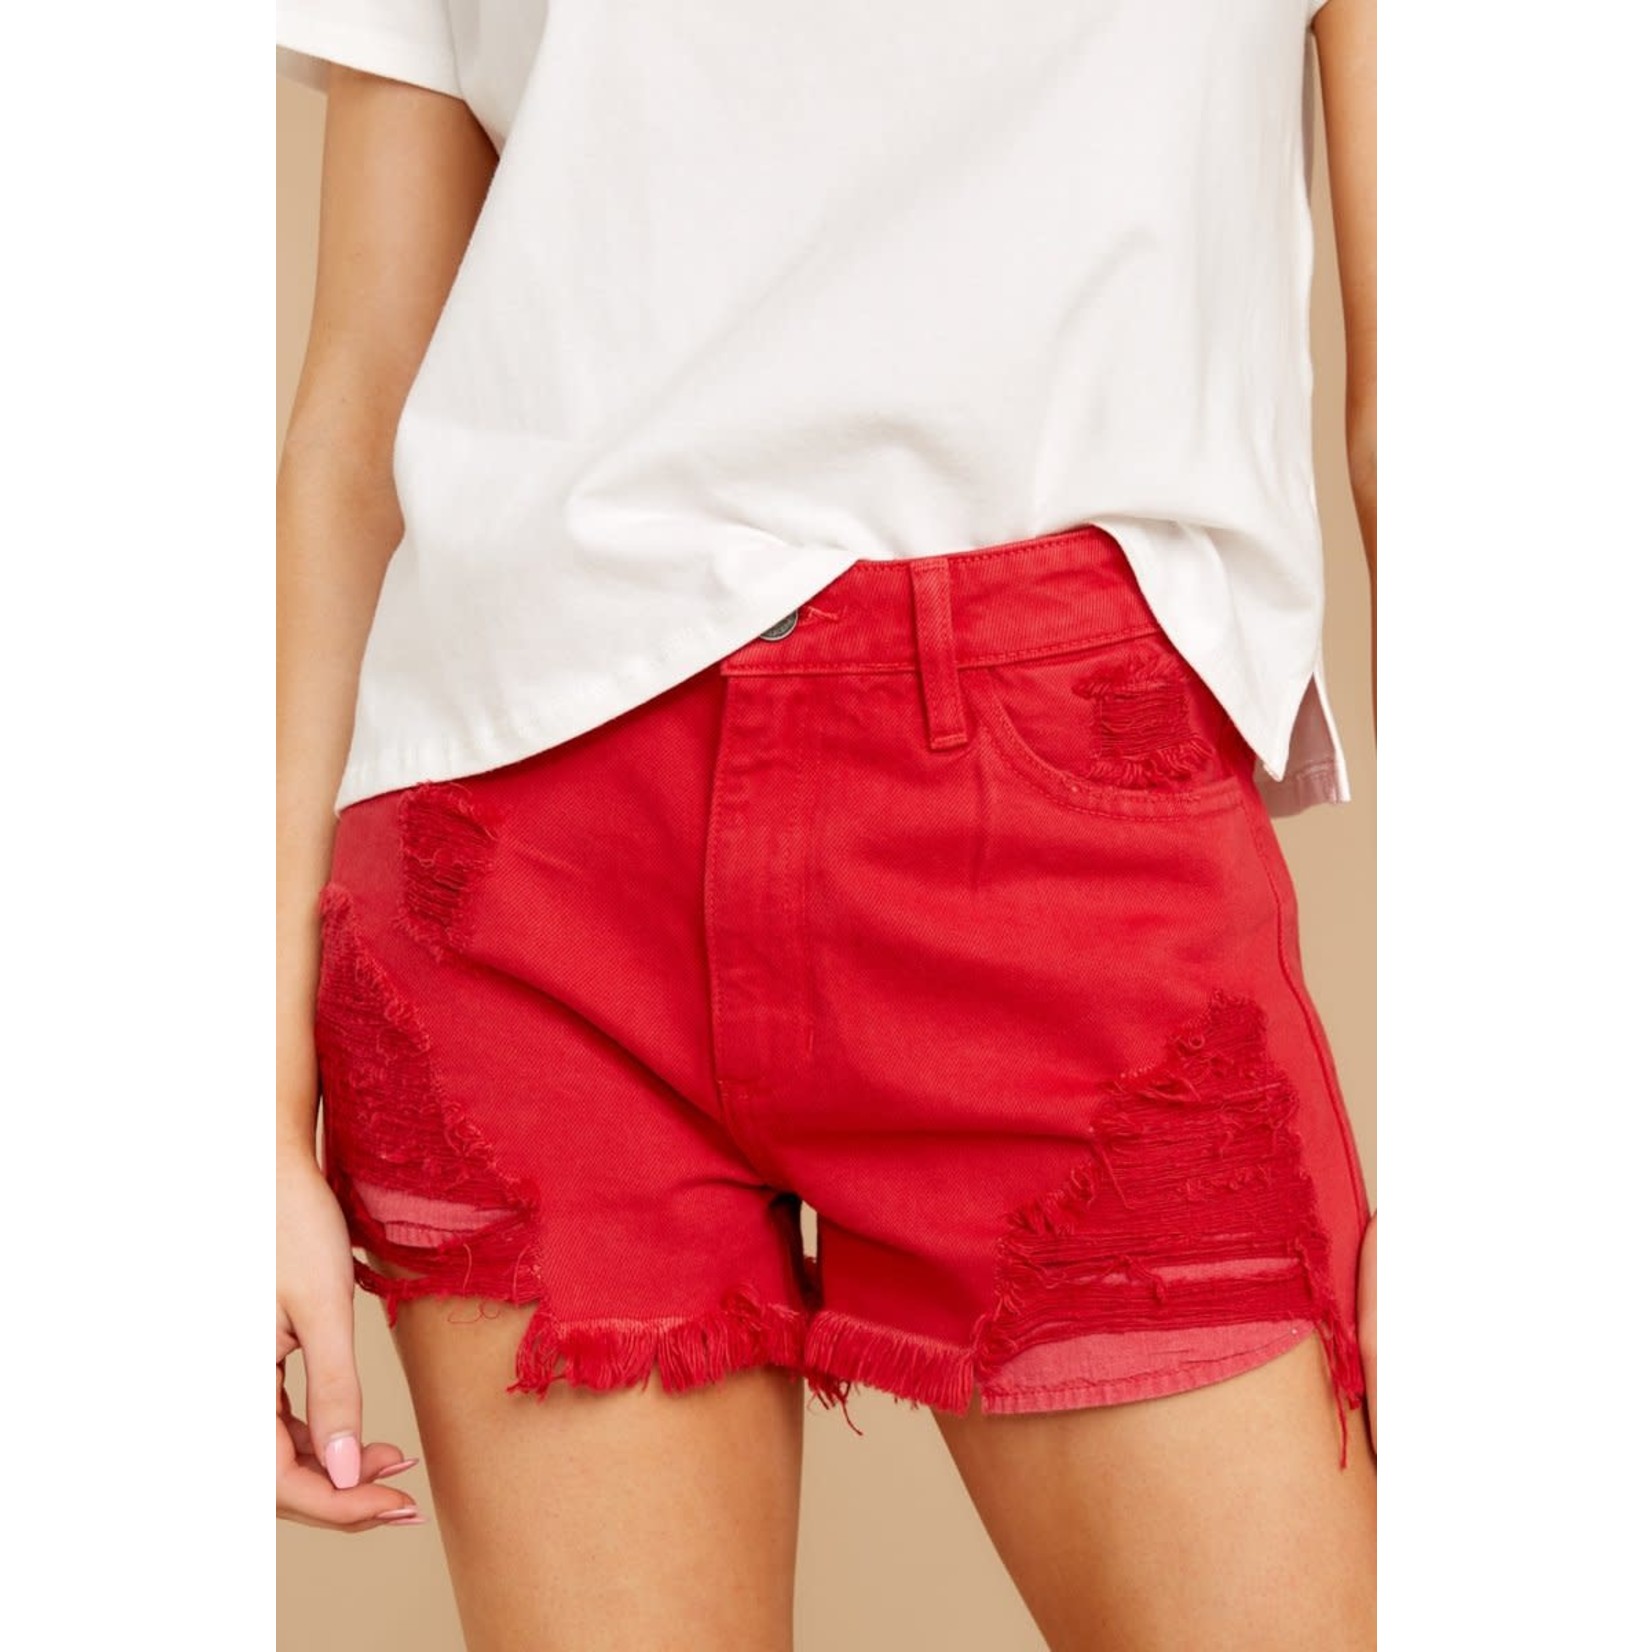 Kancan Kancan Mid-Rise Distressed Red Shorts 7327 sz S